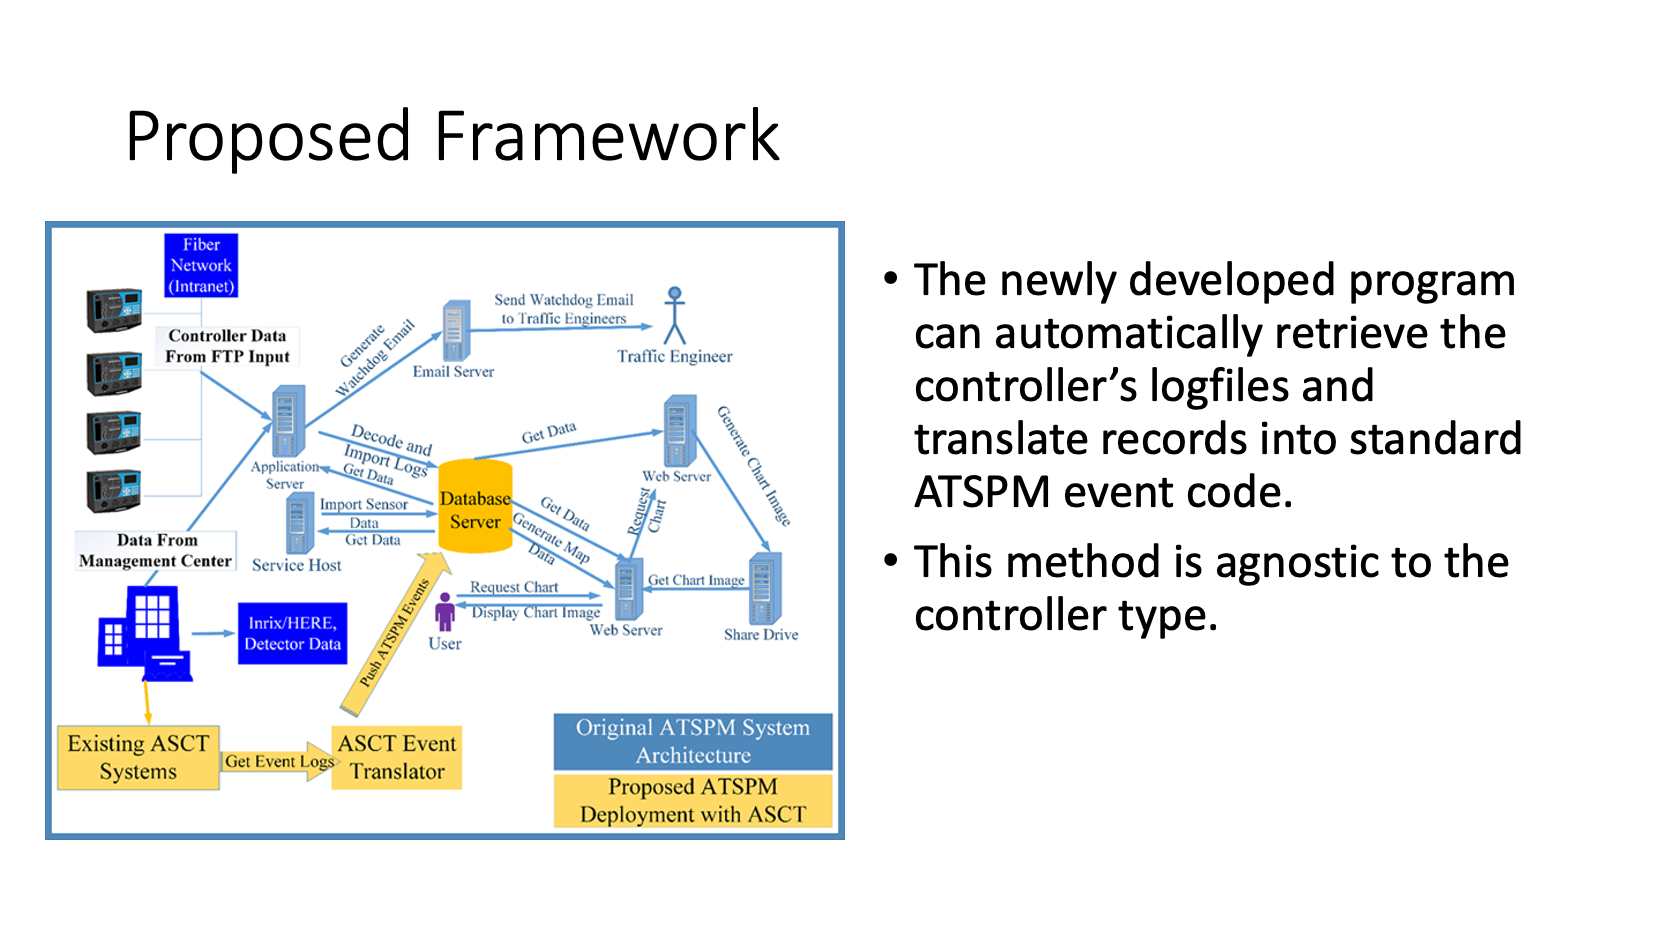 Slide image of proposed farmework with a new add on of existign ASCT Sytems going ot get event logs, to ASCT event translator to push ATSPM events, to Database server. The two bullet points read The Newly developed program can automatically retrieve the controller's logfiles and translate records ito standard ATSPM event code. This method is agnostic to the controller type.